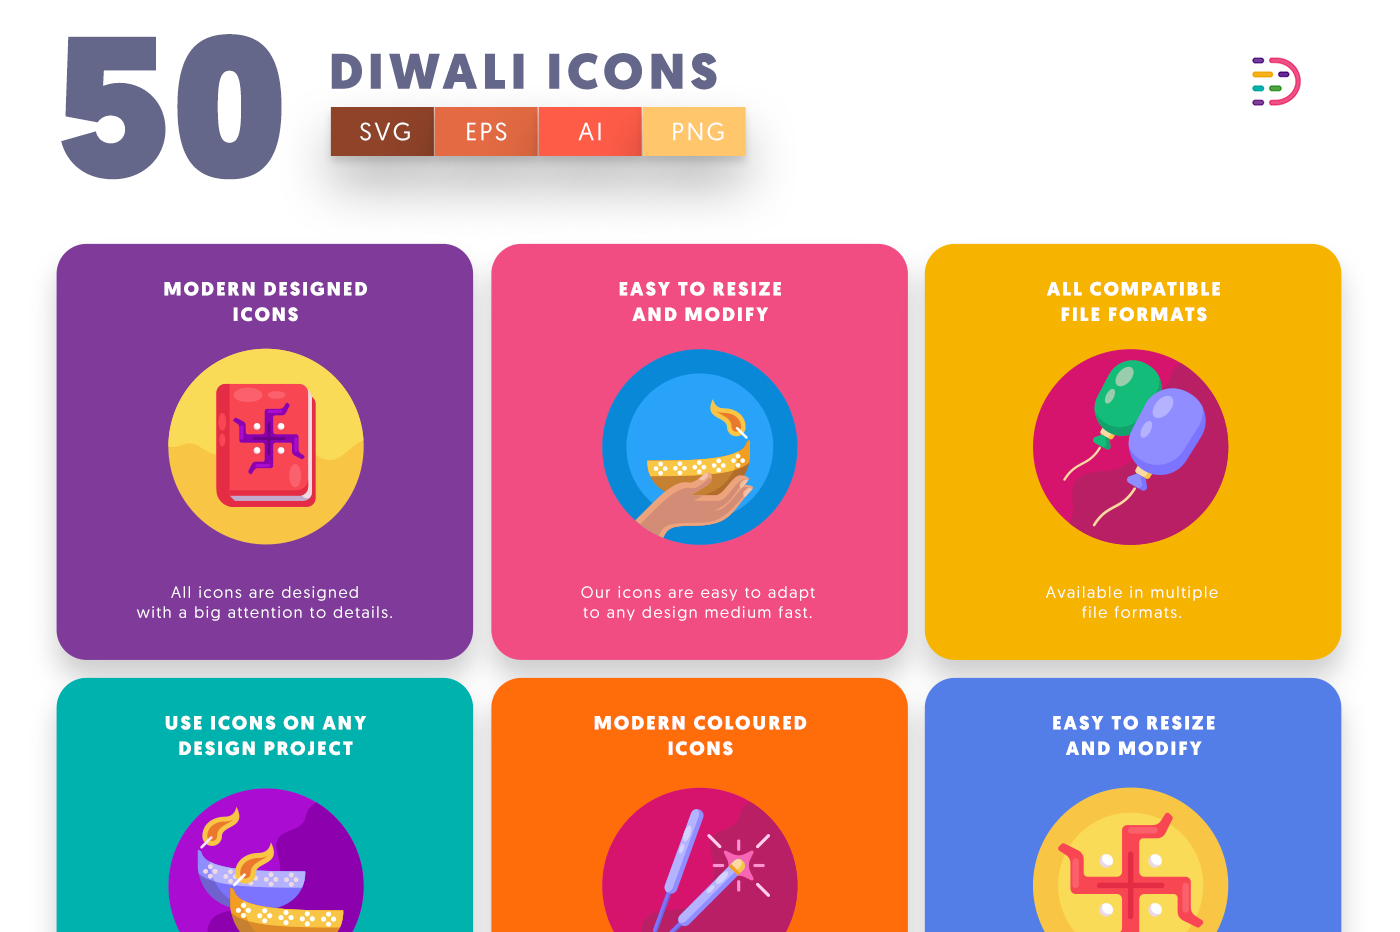  Diwali Icons with colored backgrounds 